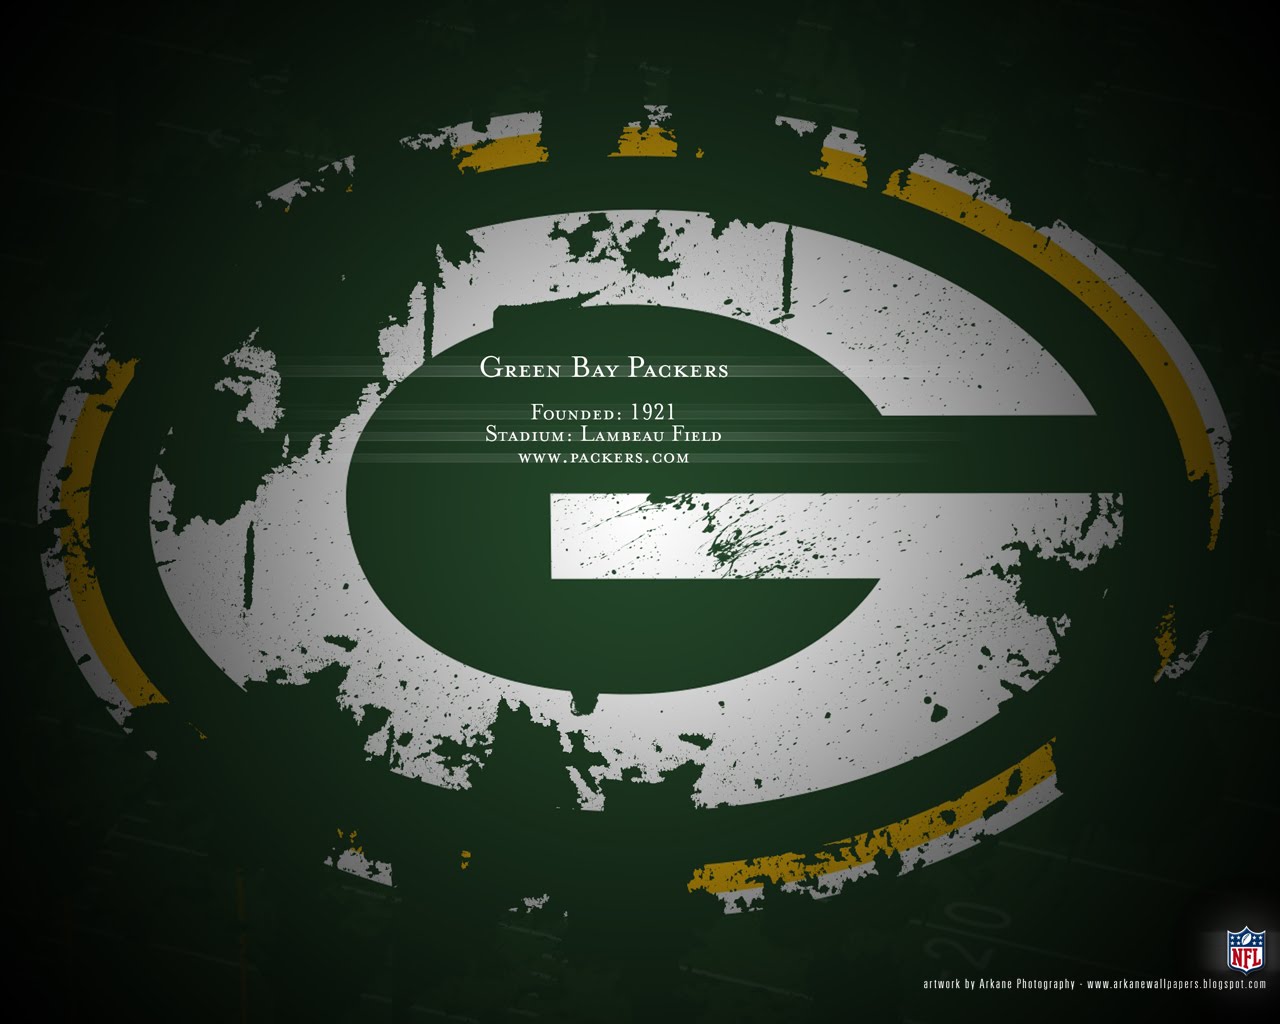 Arkane NFL Wallpapers: Profile - GREEN BAY PACKERS